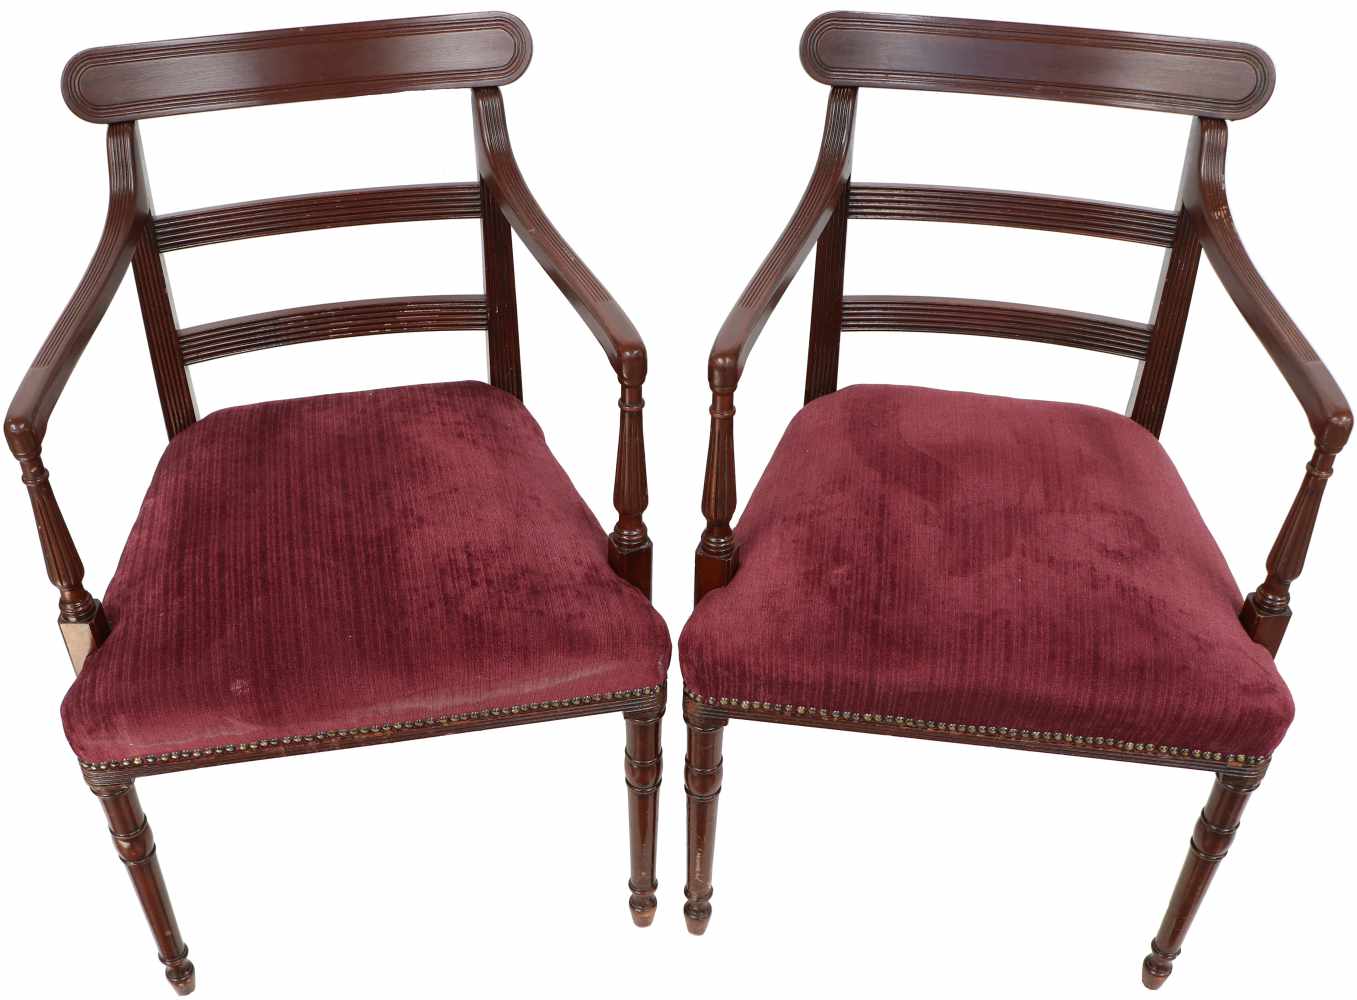 zurückgezogenA set of four chairs and a round table. Regency period style, 20th century. - Image 3 of 4